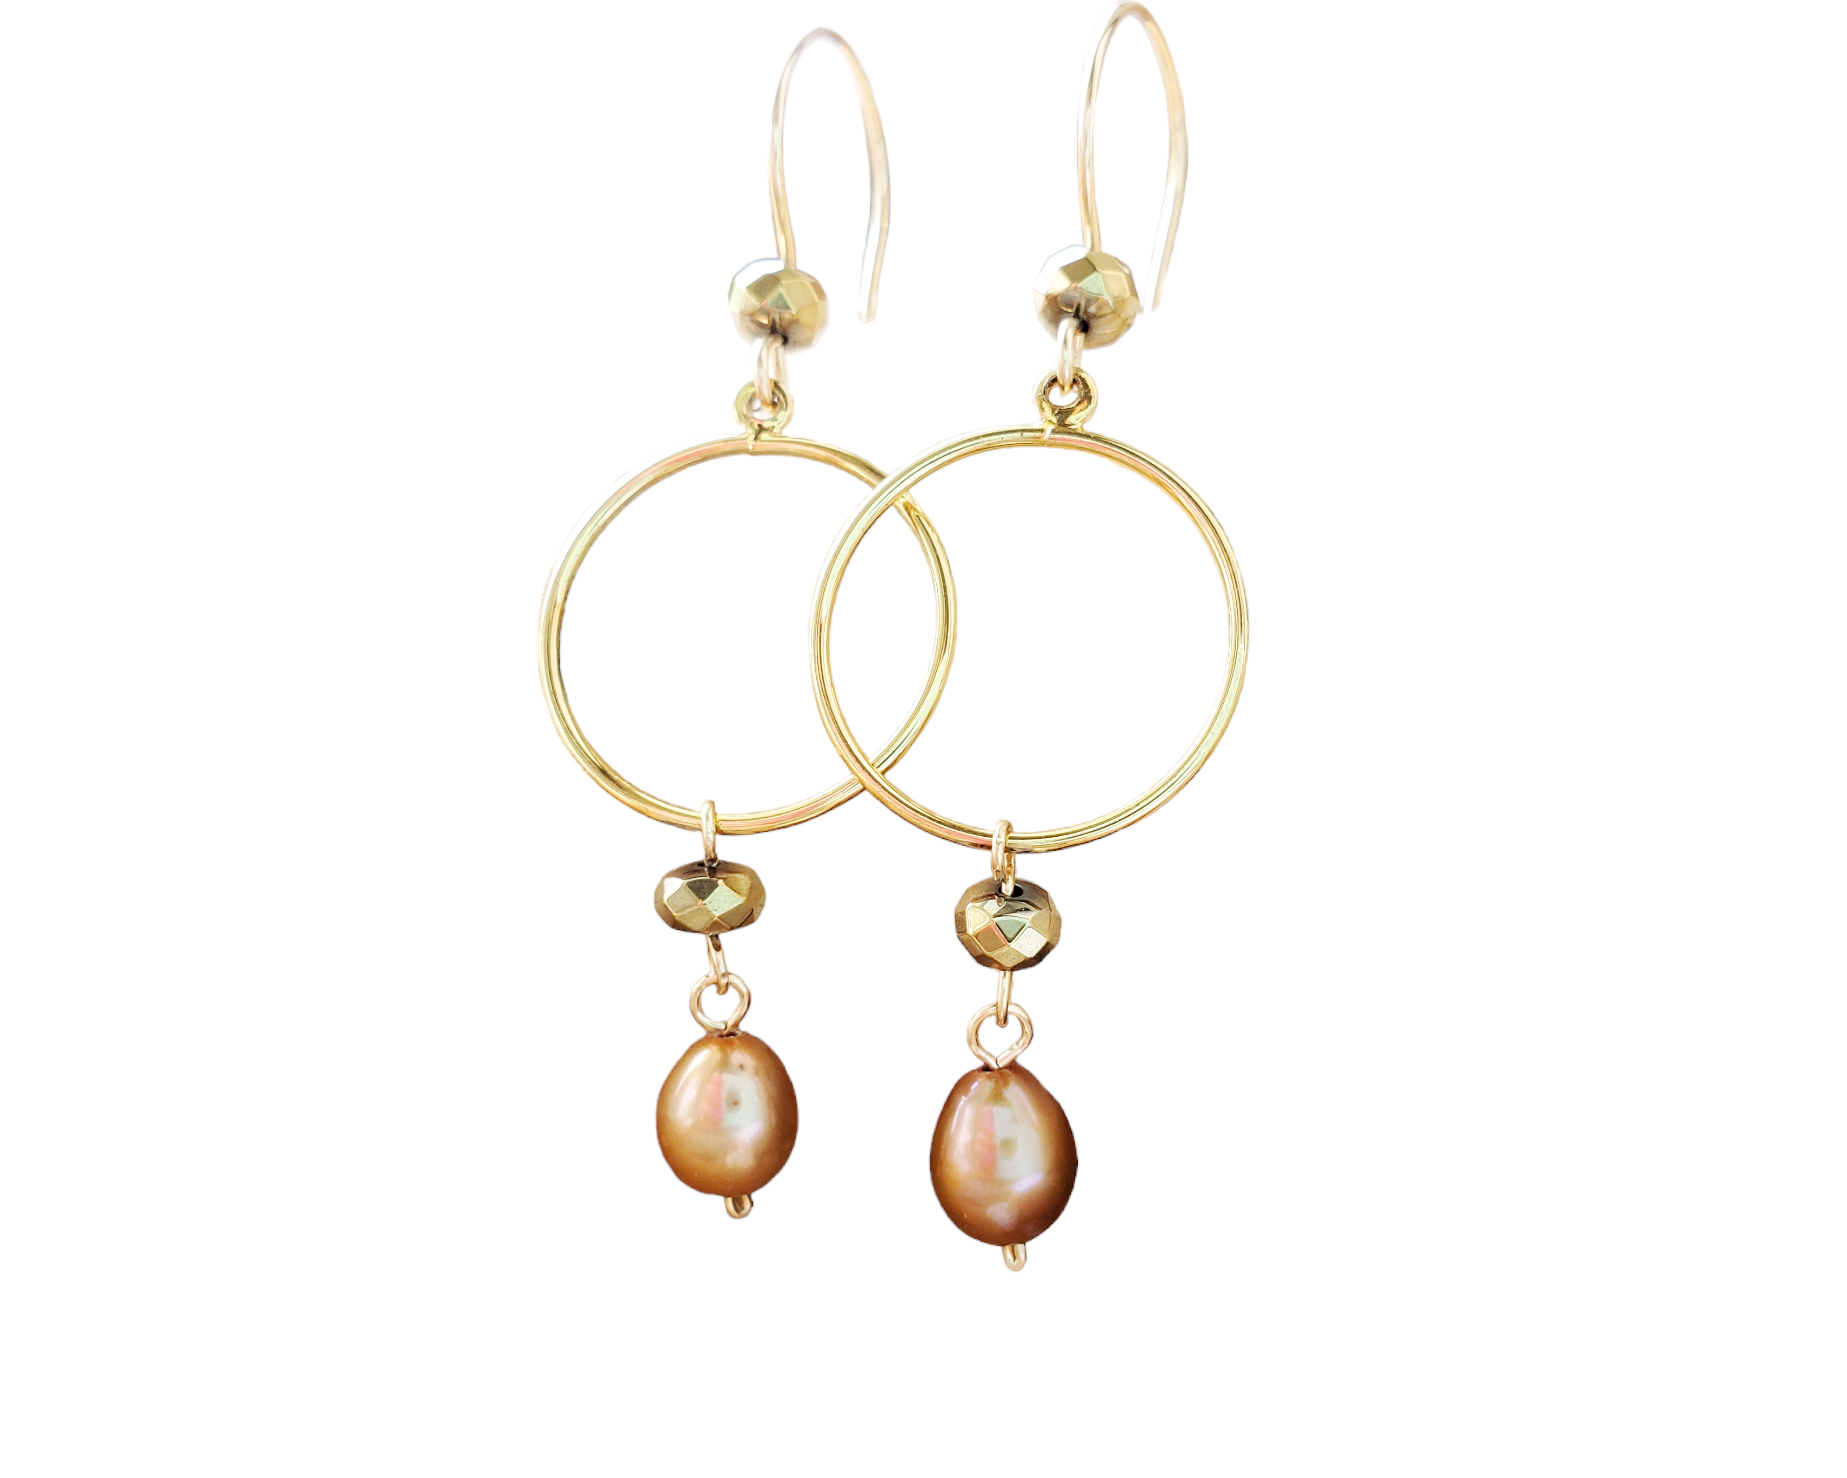 Long Gold Pearl Hoop Dangle Earrings with Gold Freshwater Cultured Pearls and Gold Hematite dangle from the hoops.